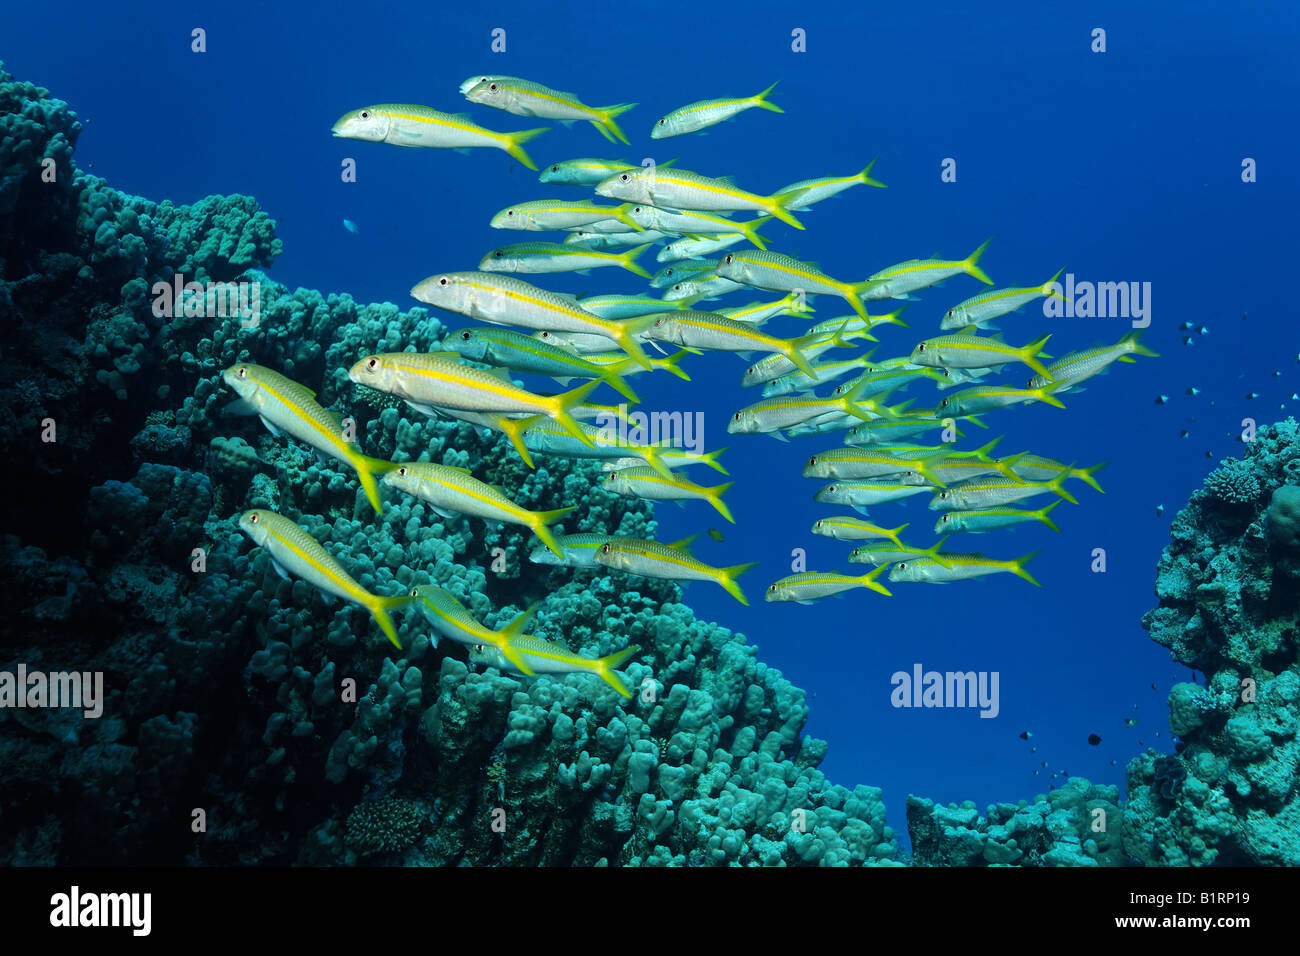 School of Yellowfin Goatfishes (Mulloidichthys vanicolensis) above a coral reef, Sharm el Sheik, Red Sea, Egypt, Africa Stock Photo